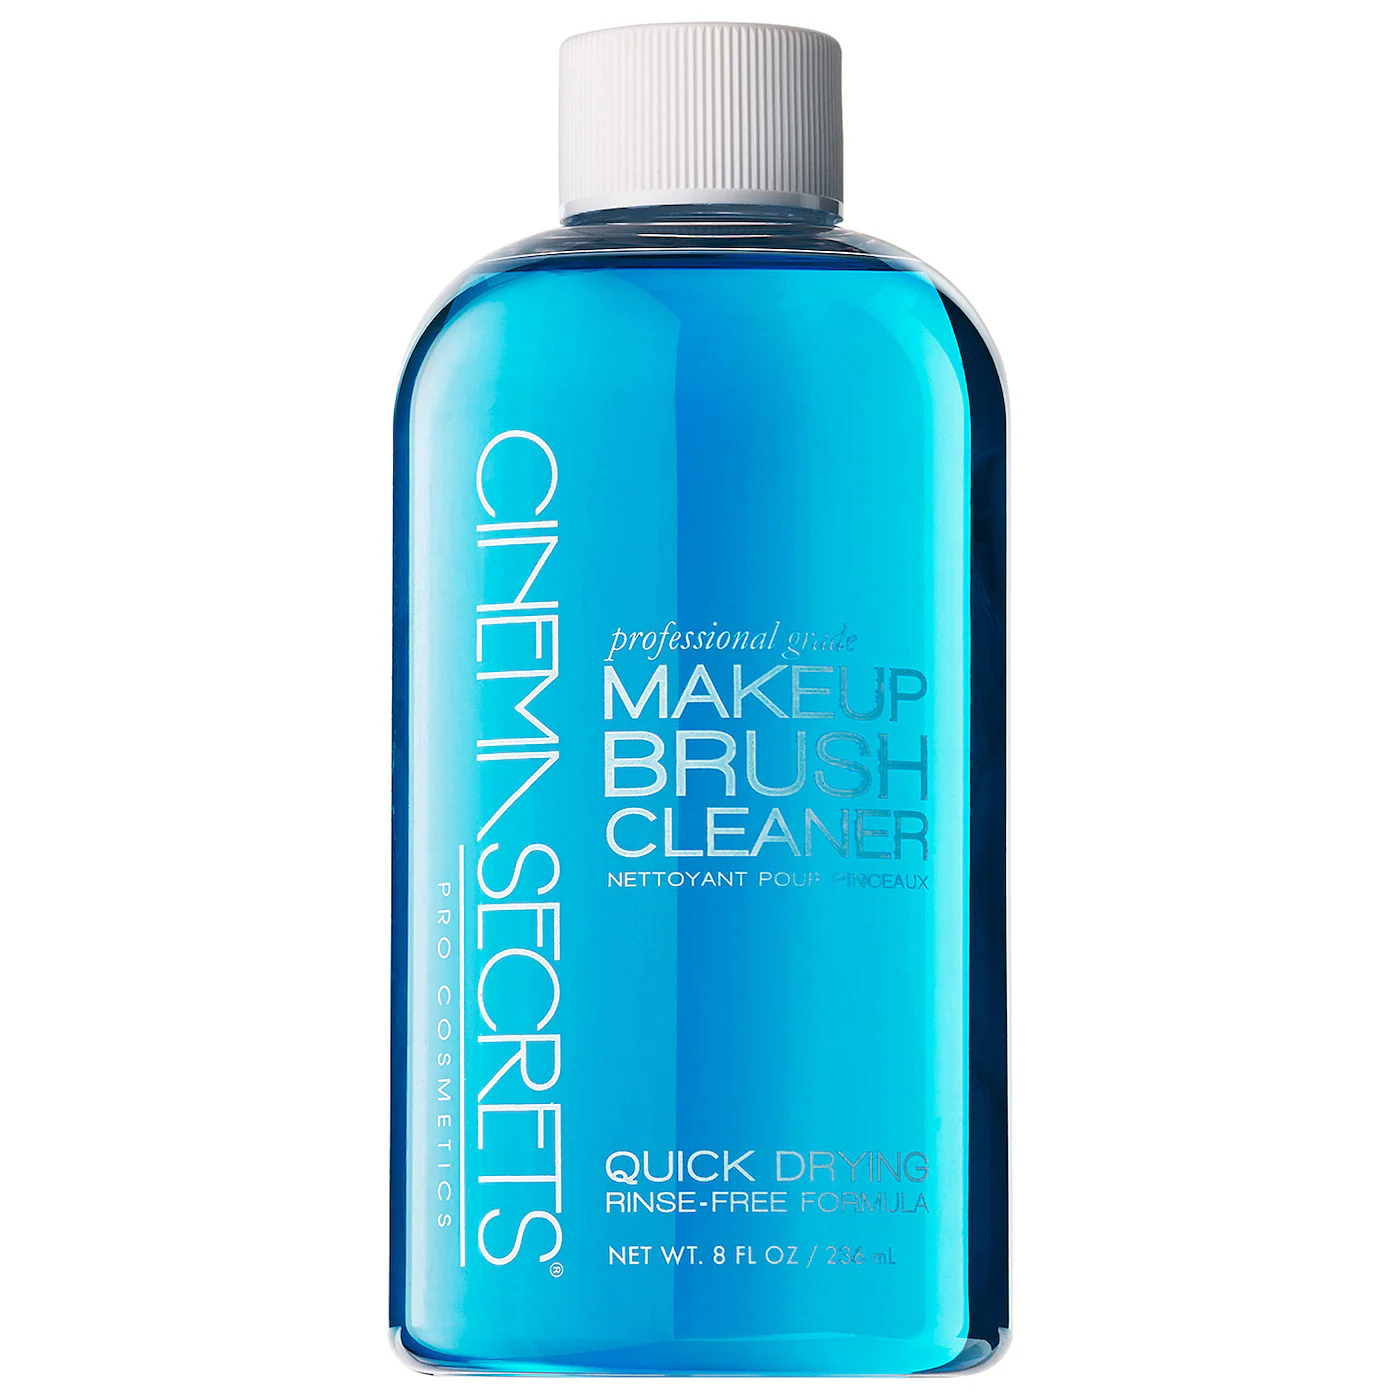 Product image of Cinema Secrets Makeup Brush Cleaner, a product that is used to clean makeup brushes and sponges